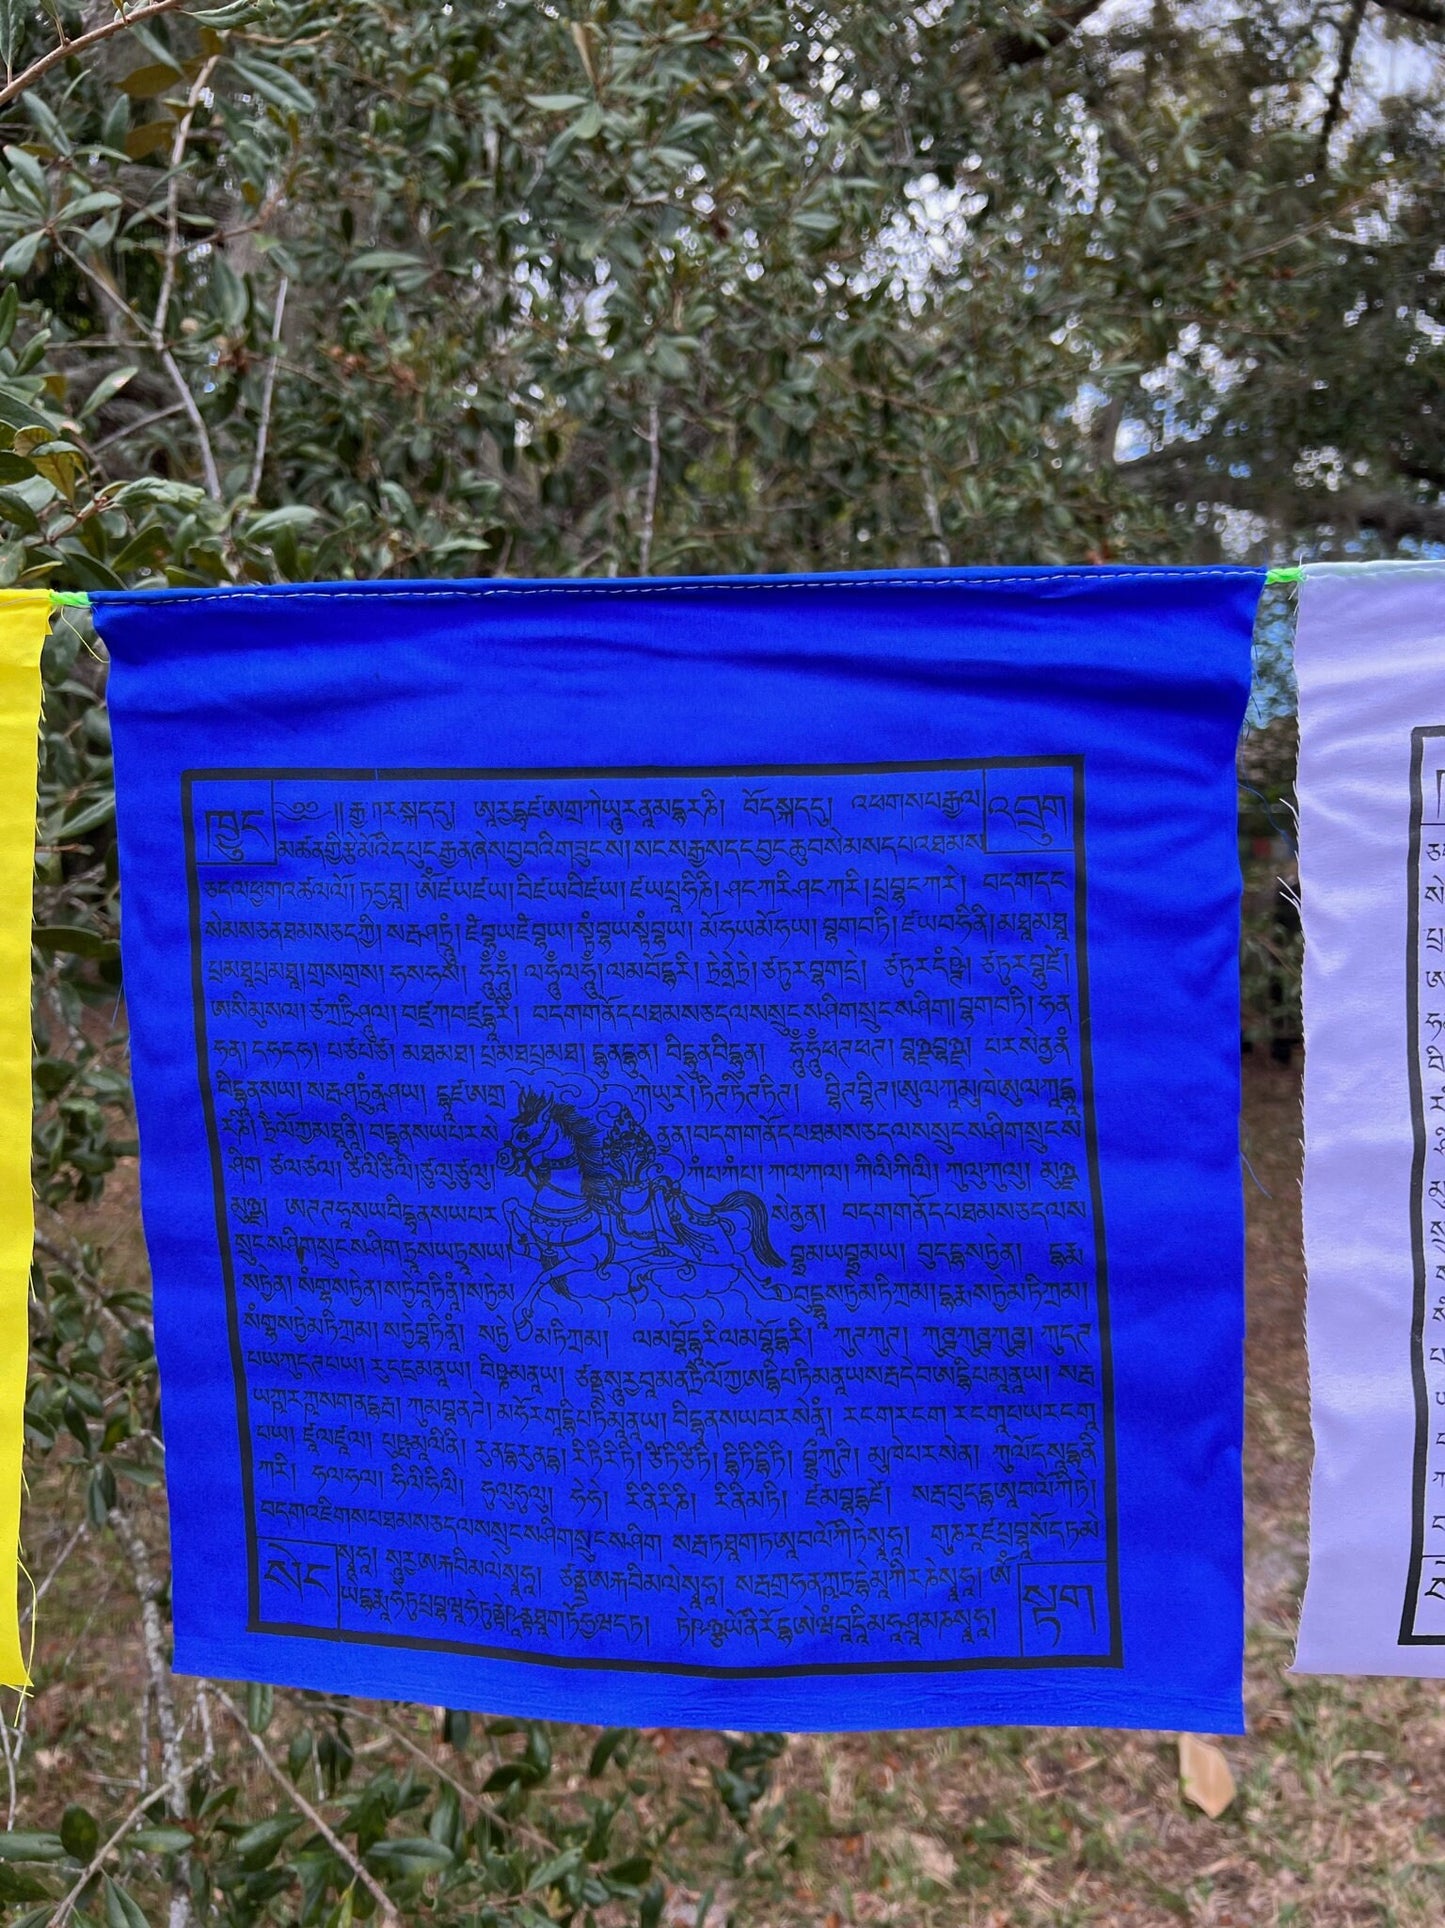 A single blue flag from a Set of 25 Tibetan prayer flags with Gyaltsen Tsenmö prayers and windhorse designs on 13x13 inch flags in 5 colors. Believed to bring success to virtuous endeavors.